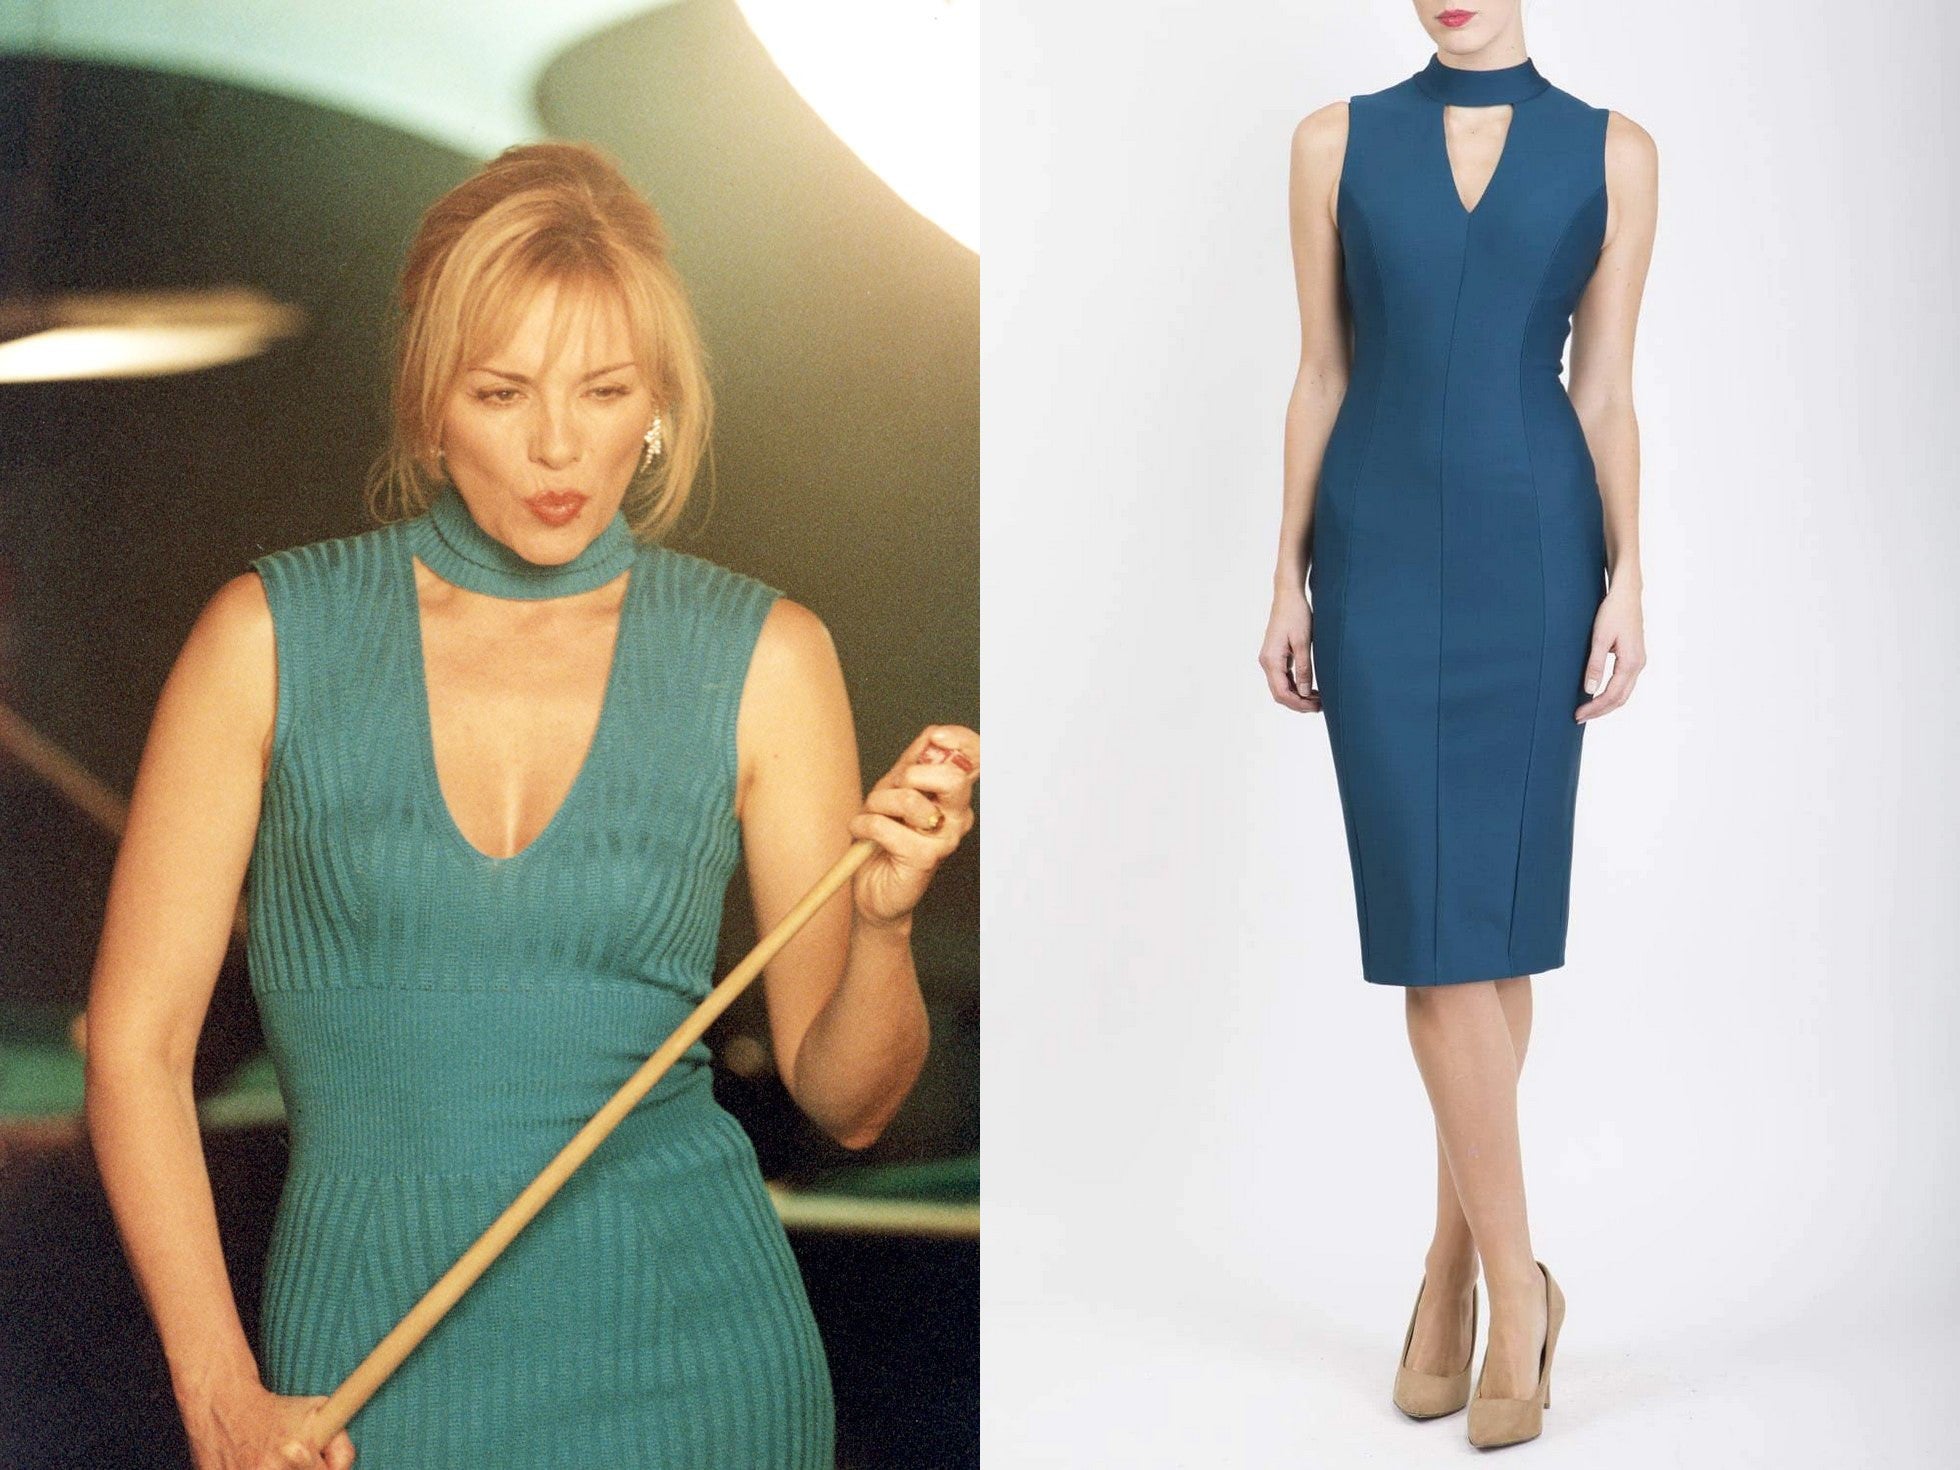 Samantha Jones pictured playing snooker, whilst wearing a choker style dress, with cutout - attached is the Diva Catwalk Galway dress.